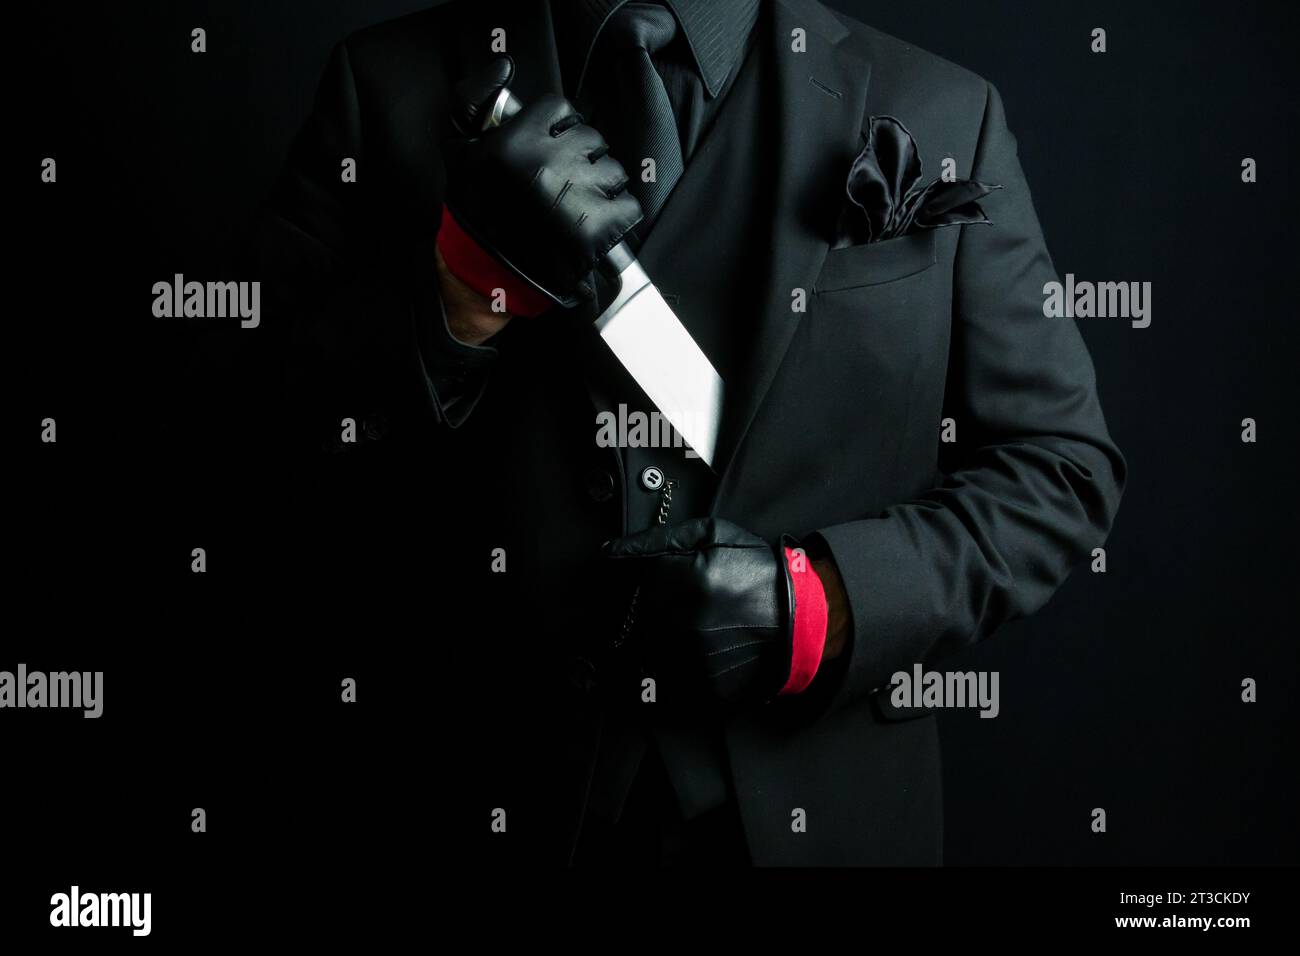 Portrait of Mysterious Man in Black Suit Pulling Knife Out of Jacket. Mafia Hitman or Gangster Stock Photo